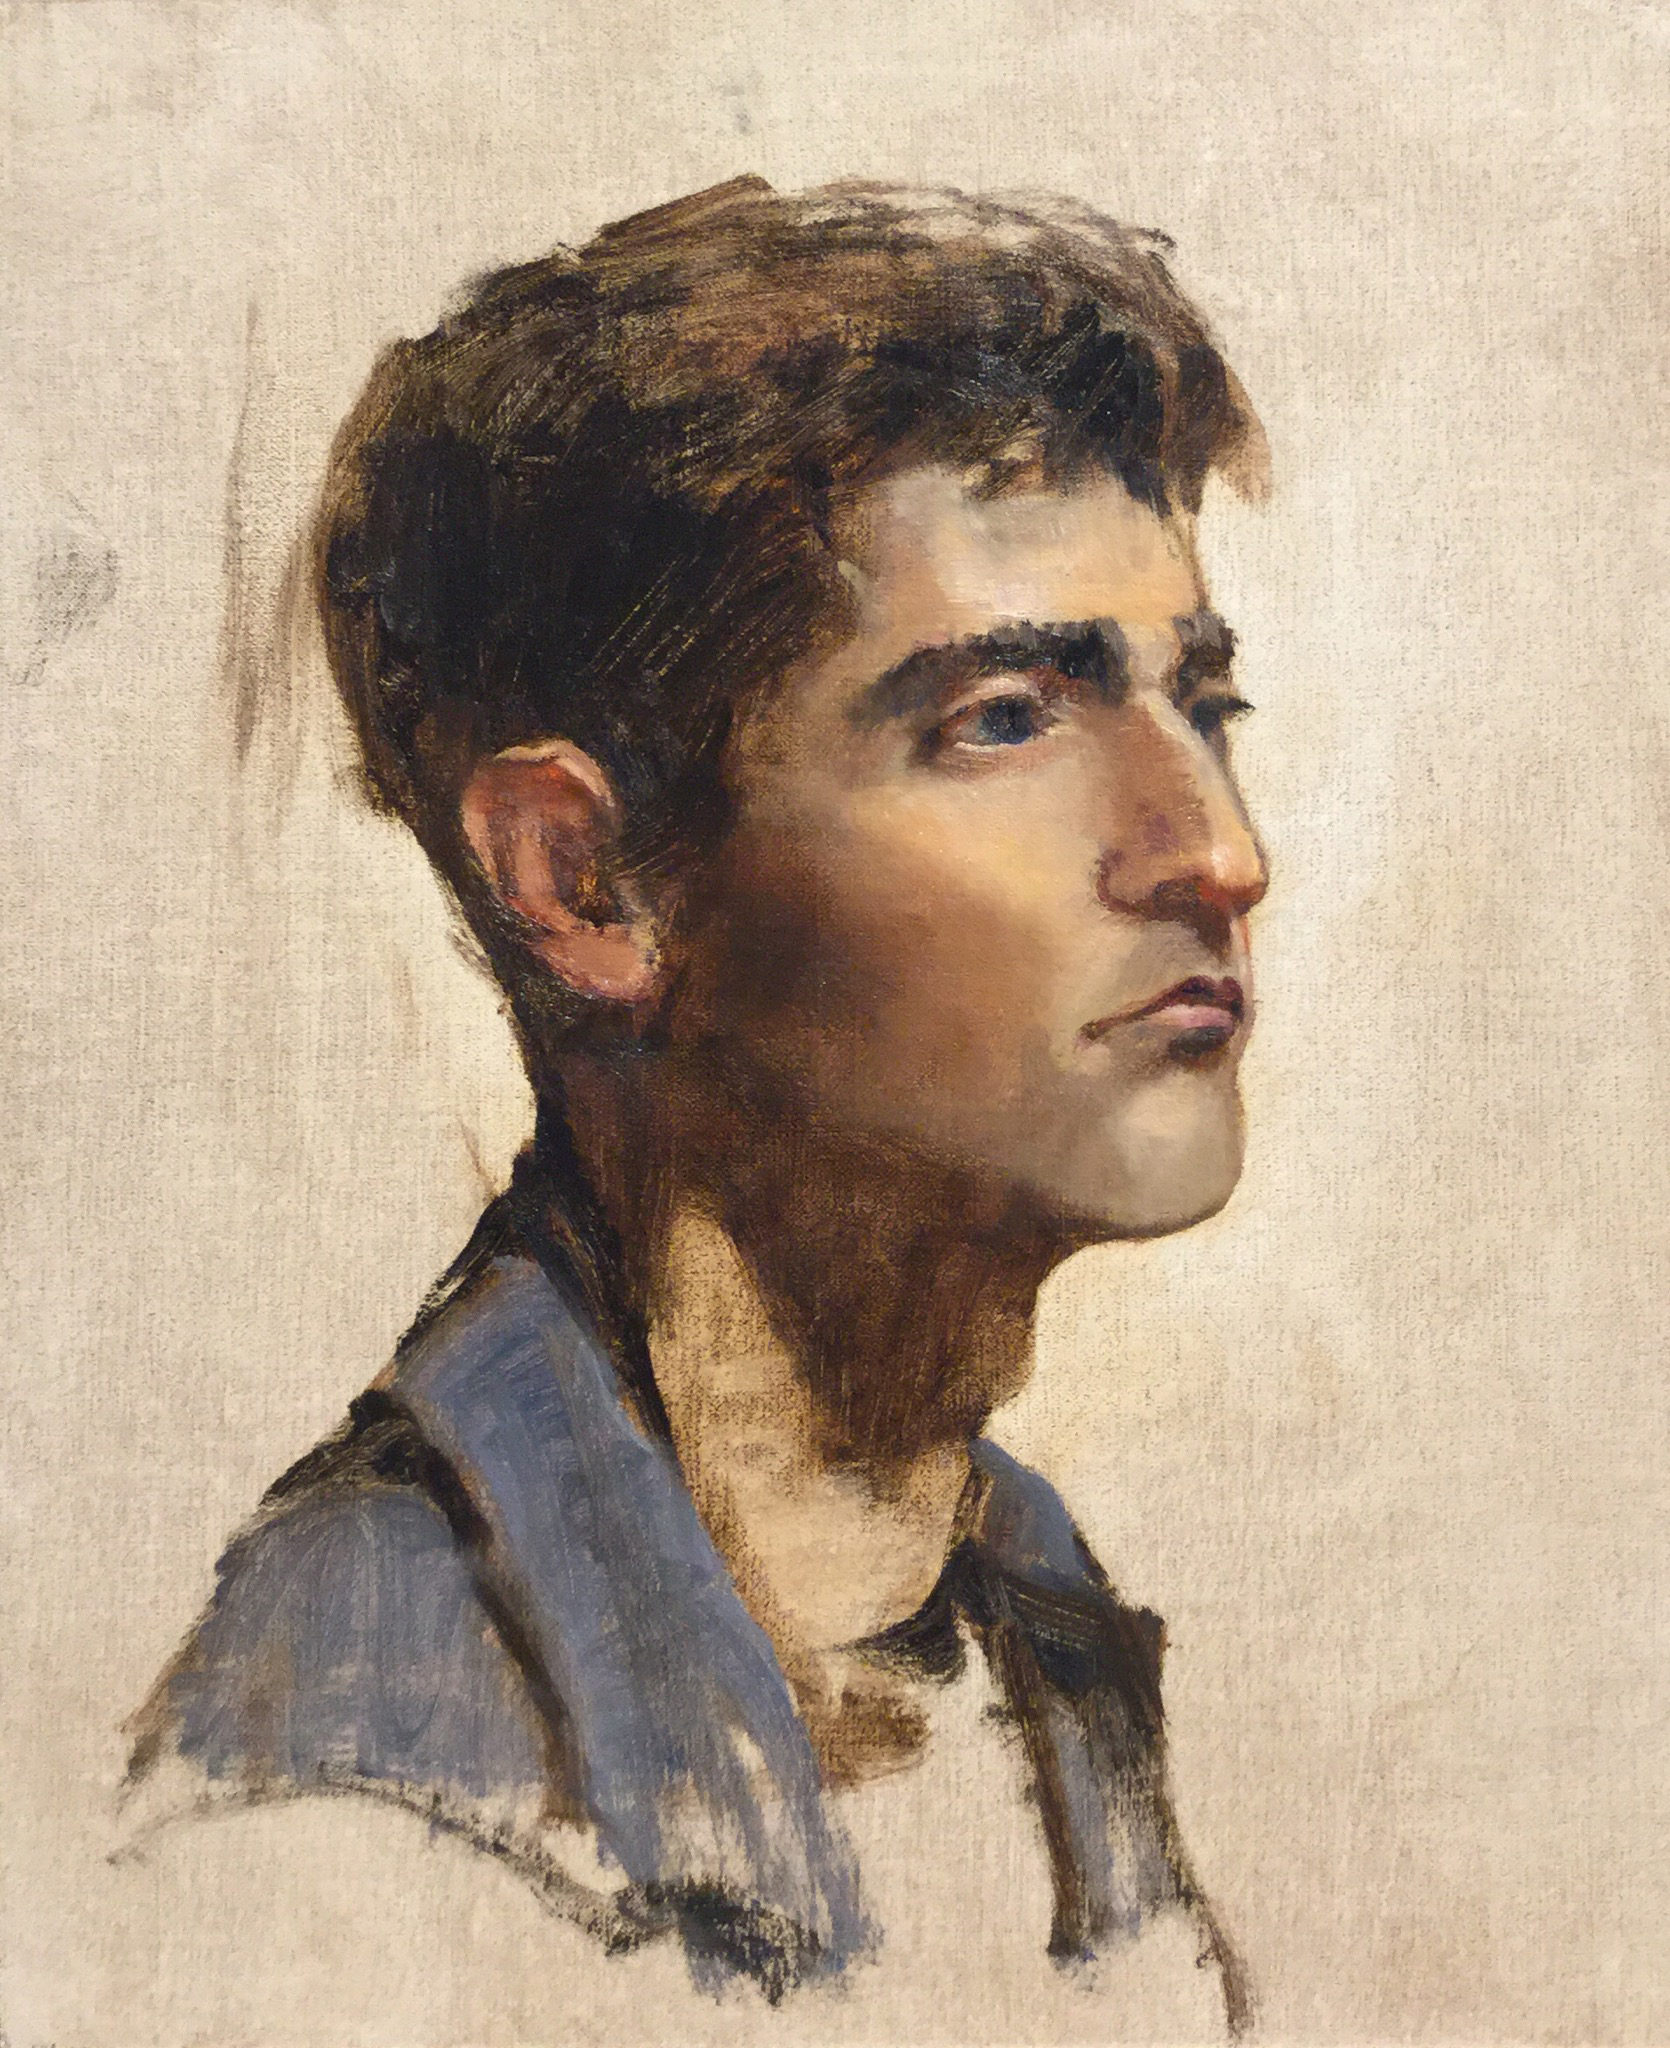  PORTRAIT OF A YOUNG MAN  oil on linen  | 12” X 10” 